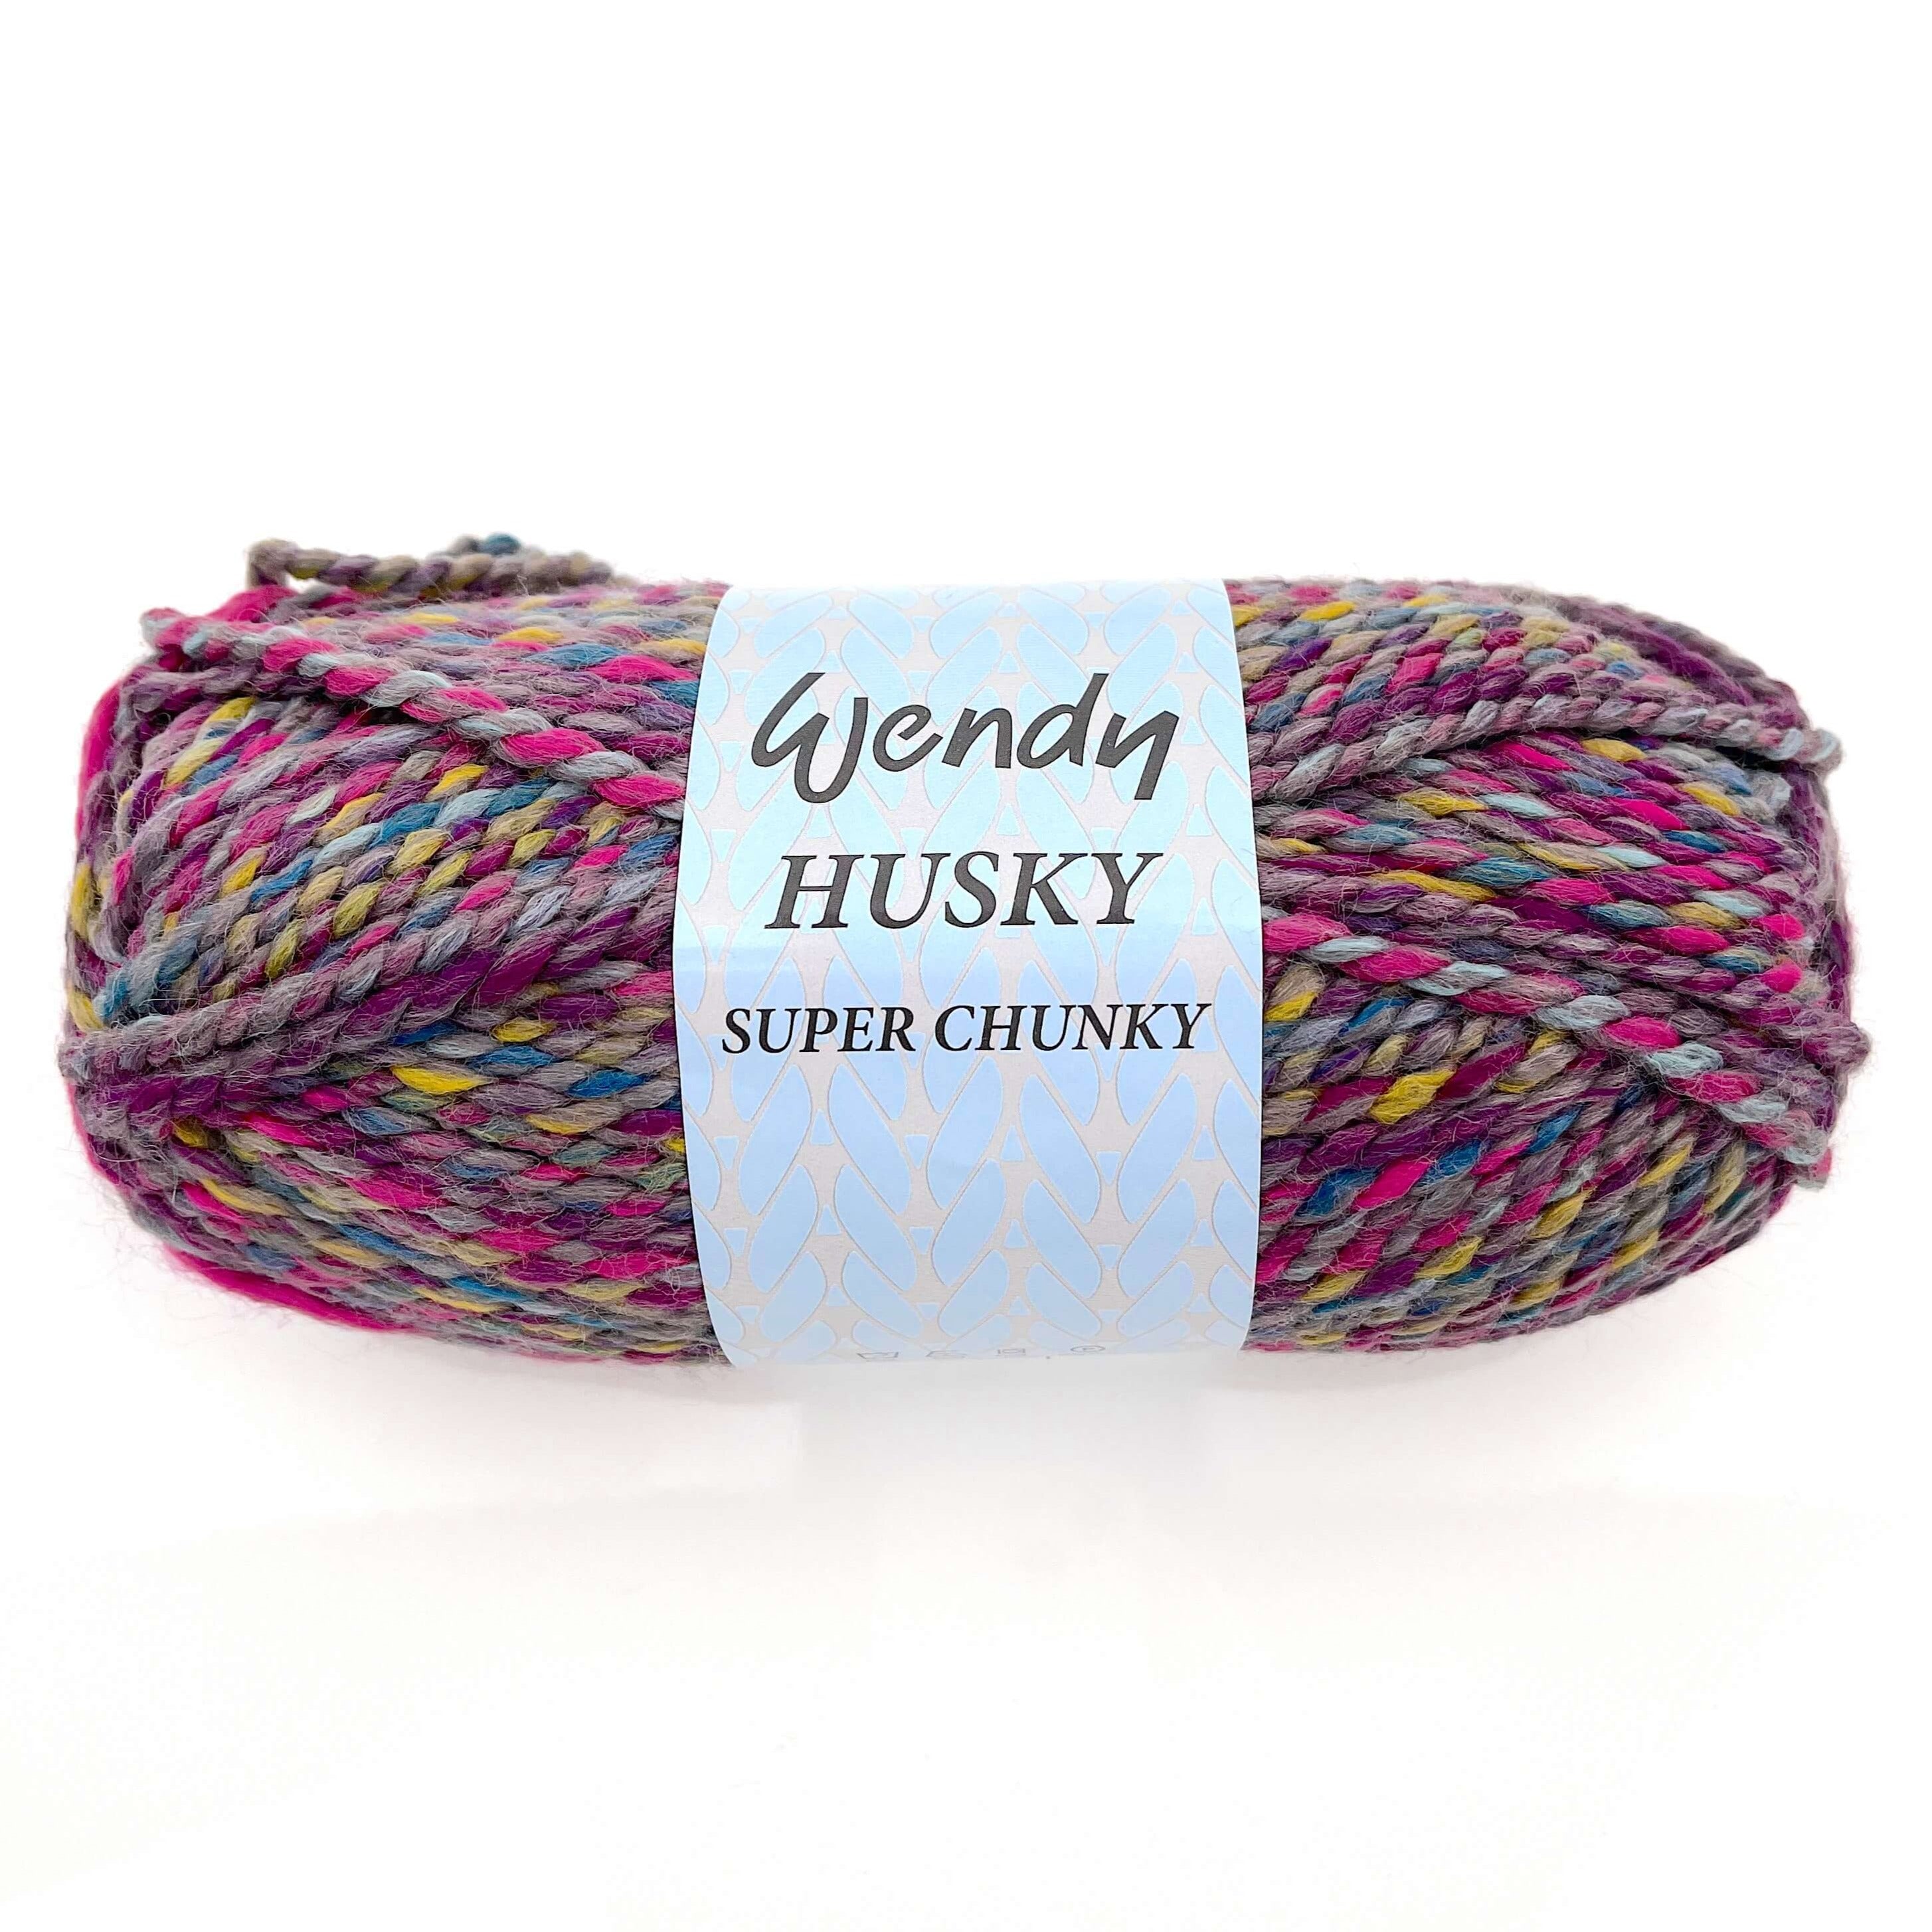 Sconch Yarn Shop - Peak (5685) Wendy Husky Super Chunky £3.75 a ball 100%  Acrylic 100g Ball Meterage: approx. 80m Needle Size: 10mm Tension: 10cm / 4  inches = 10 sts / 14 rows (P&P - £3.50 / FREE shipping for orders over £30)